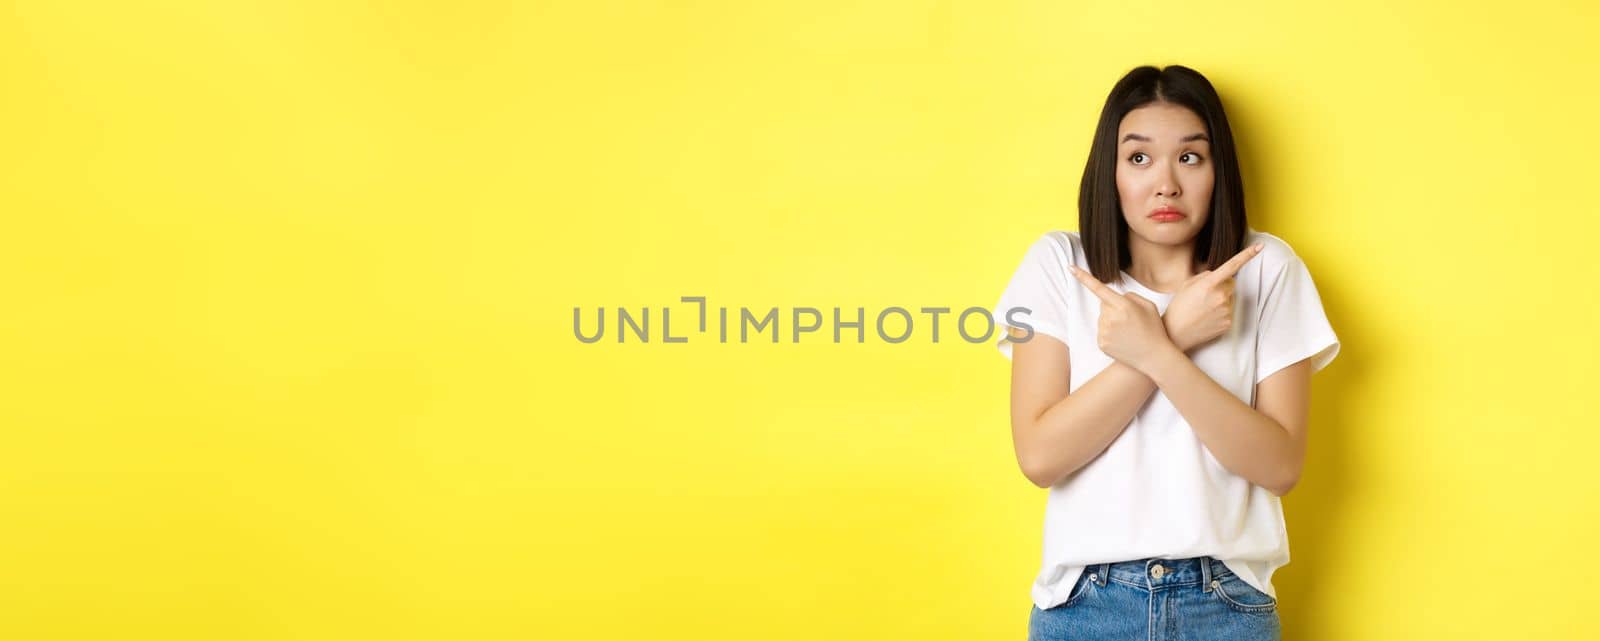 Indecisive asian girl need help with choice, pointing fingers sideways and looking confused, standing over yellow background.